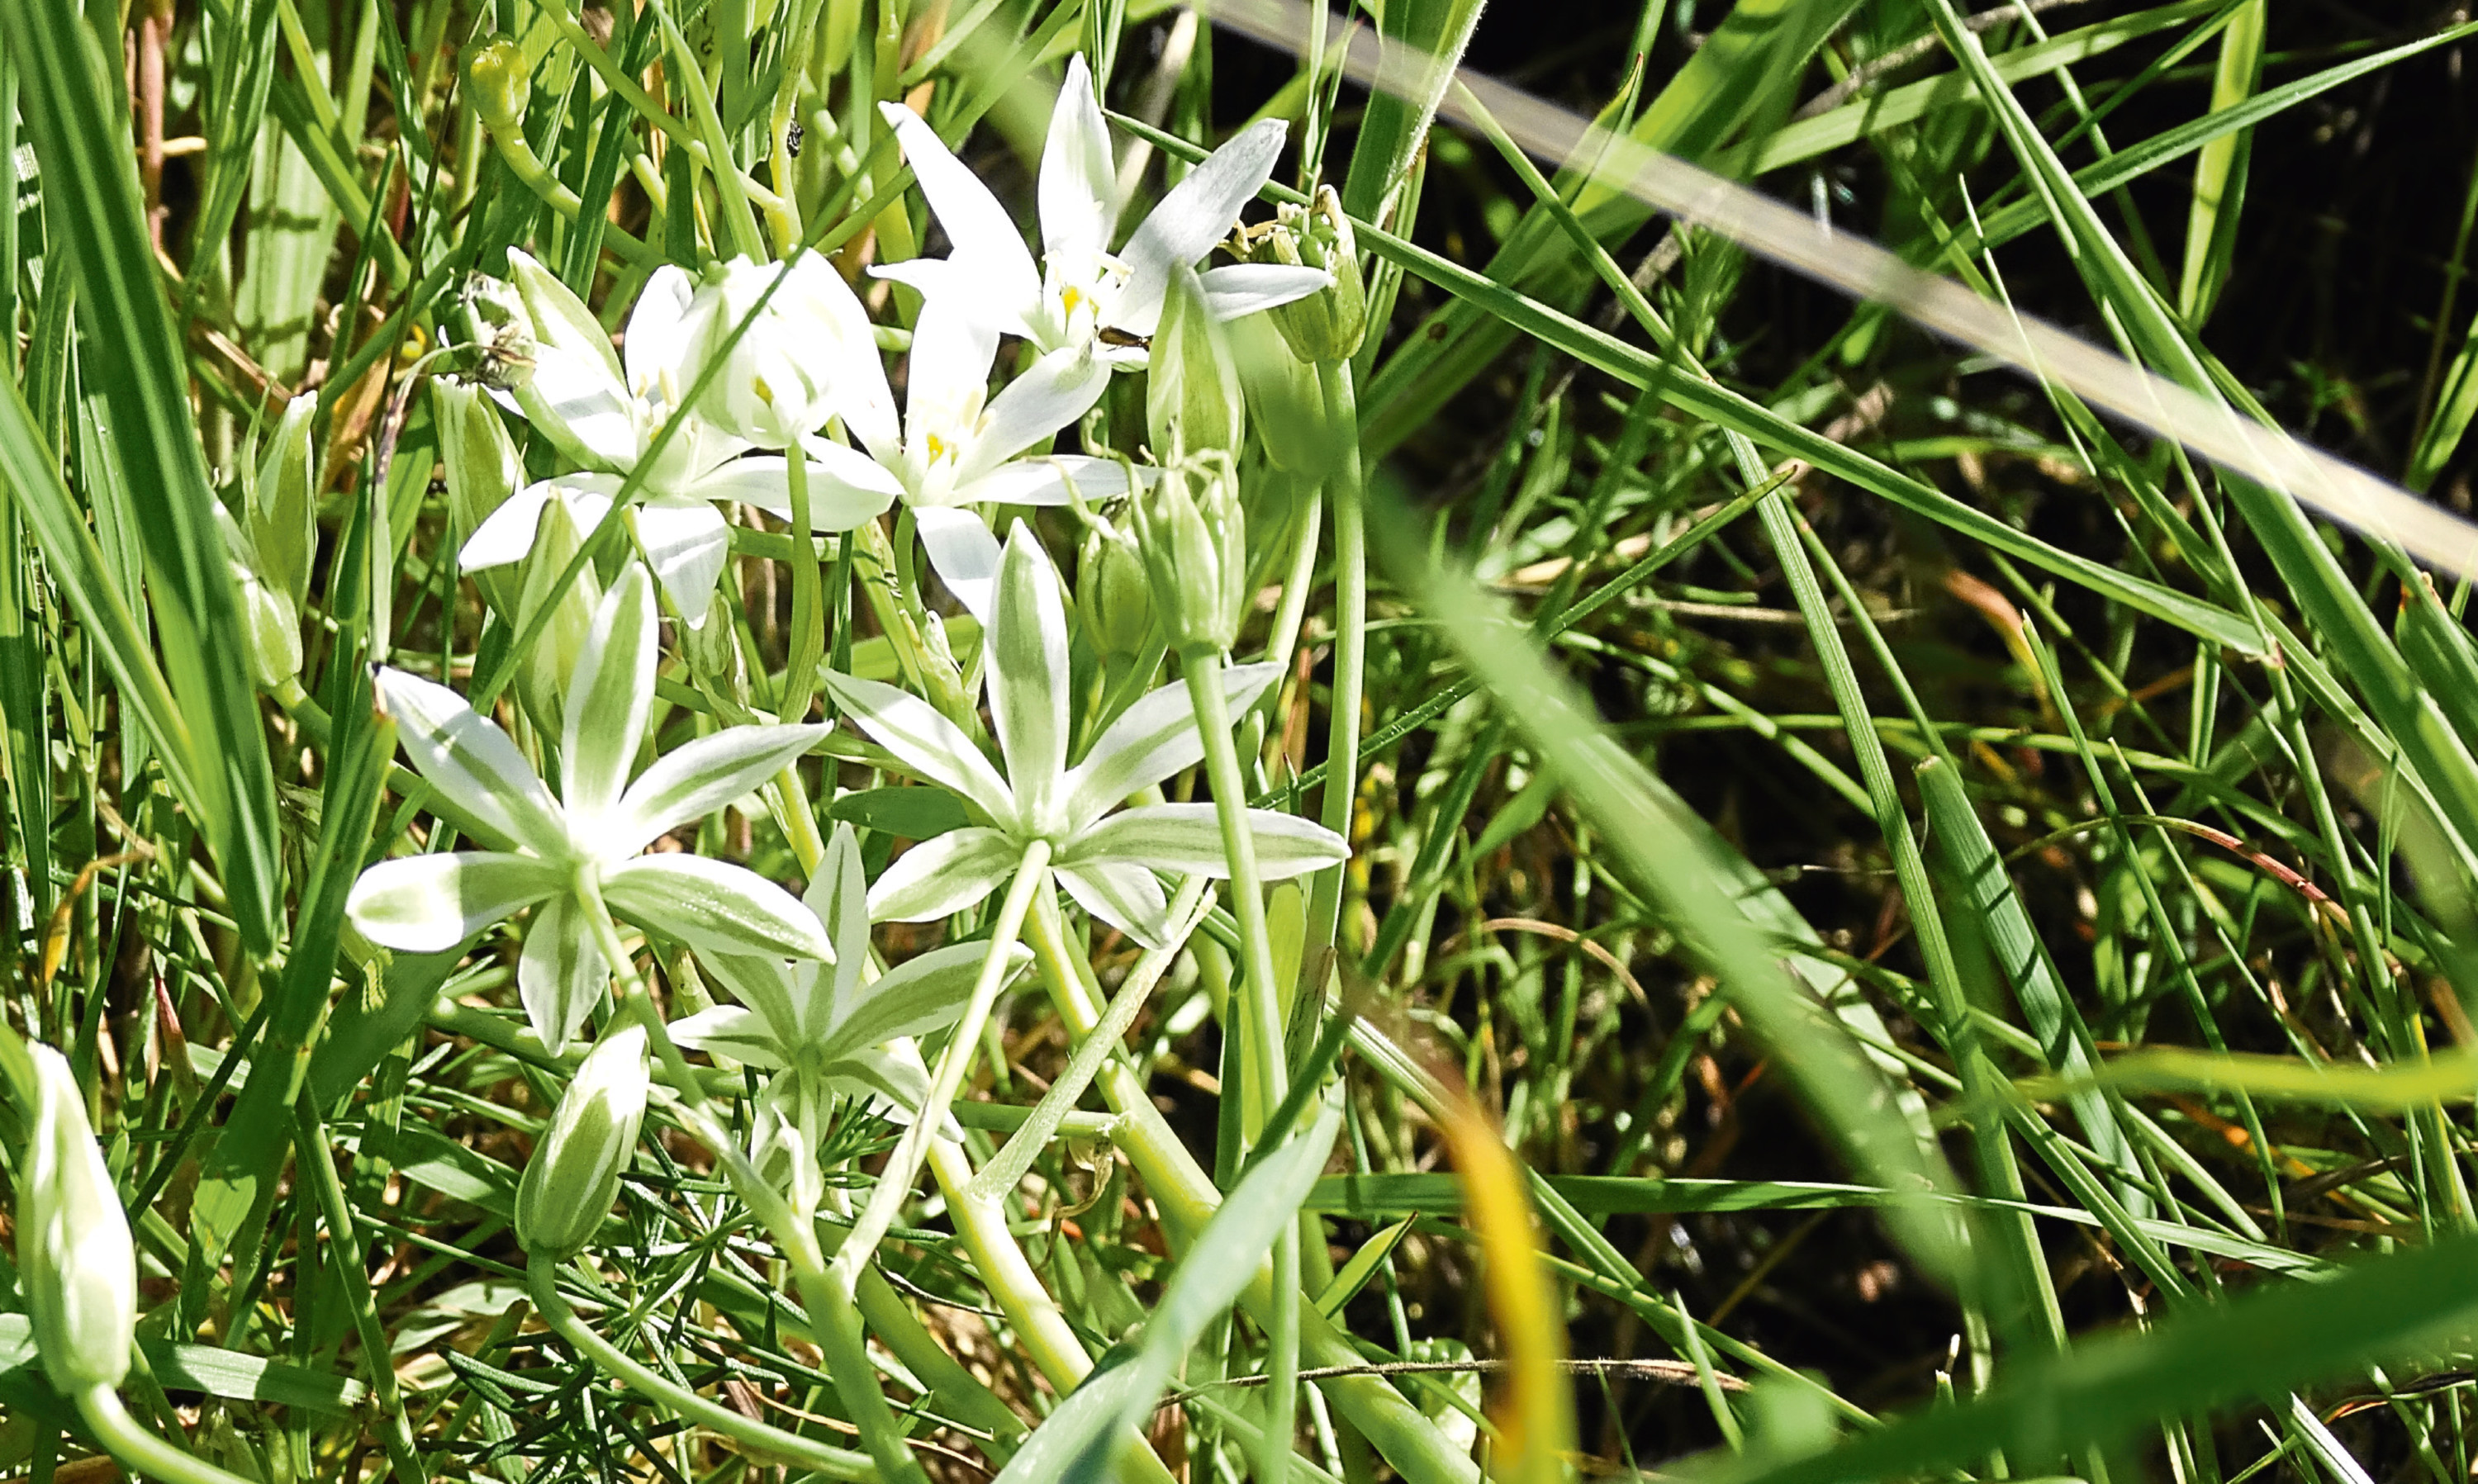 The common Star of Bethlehem flower, which is actually very uncommon in  Scotland.